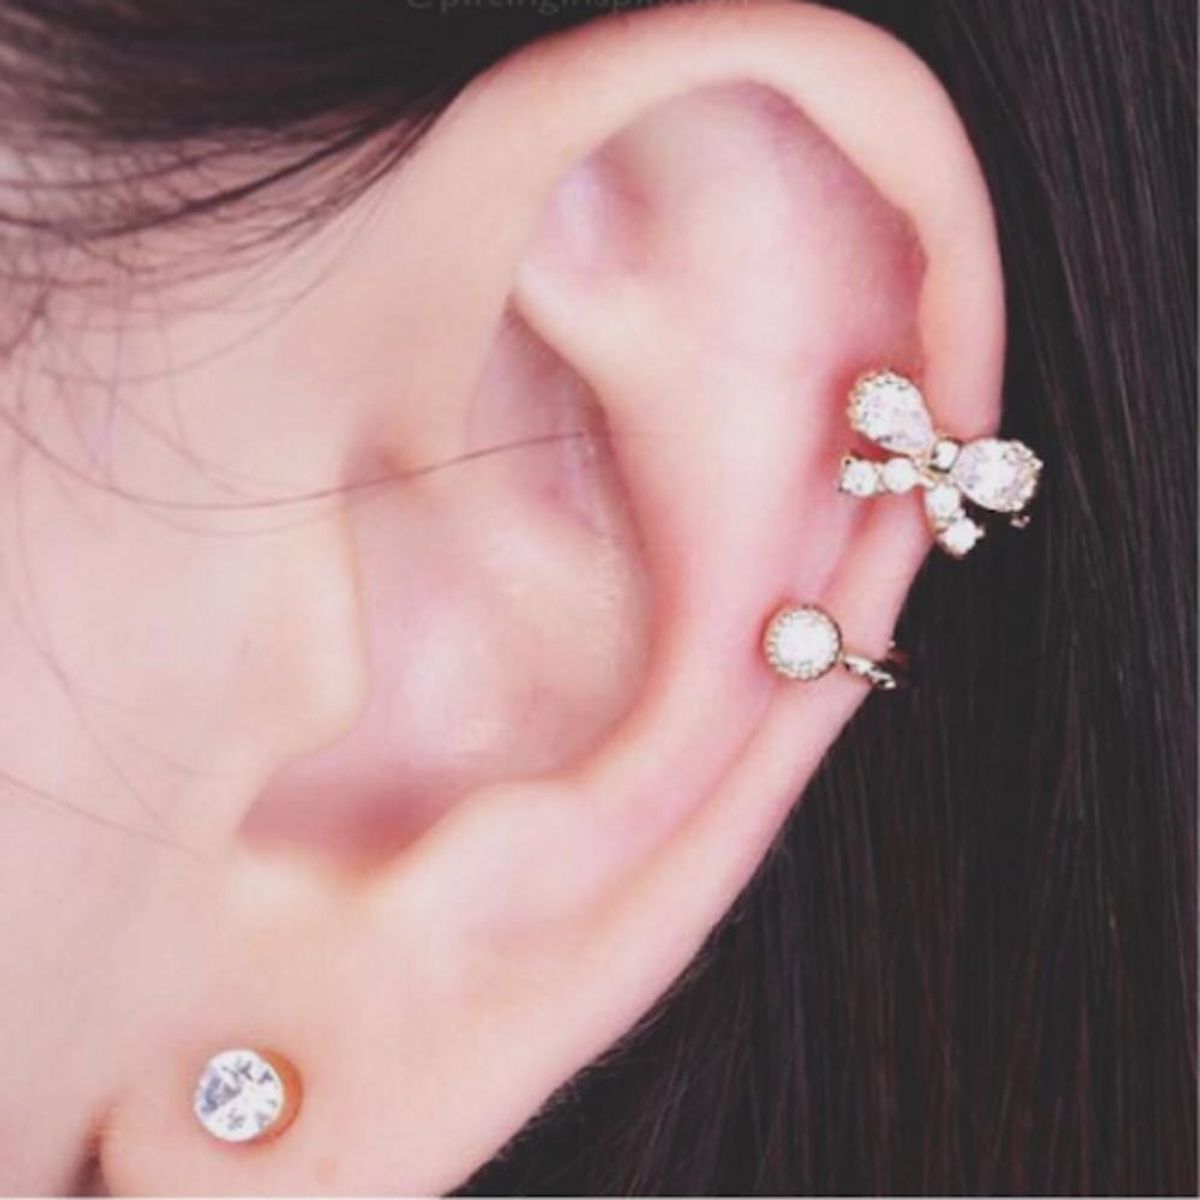 7 Cool-Girl Piercings With Just the Right Amount of Edge